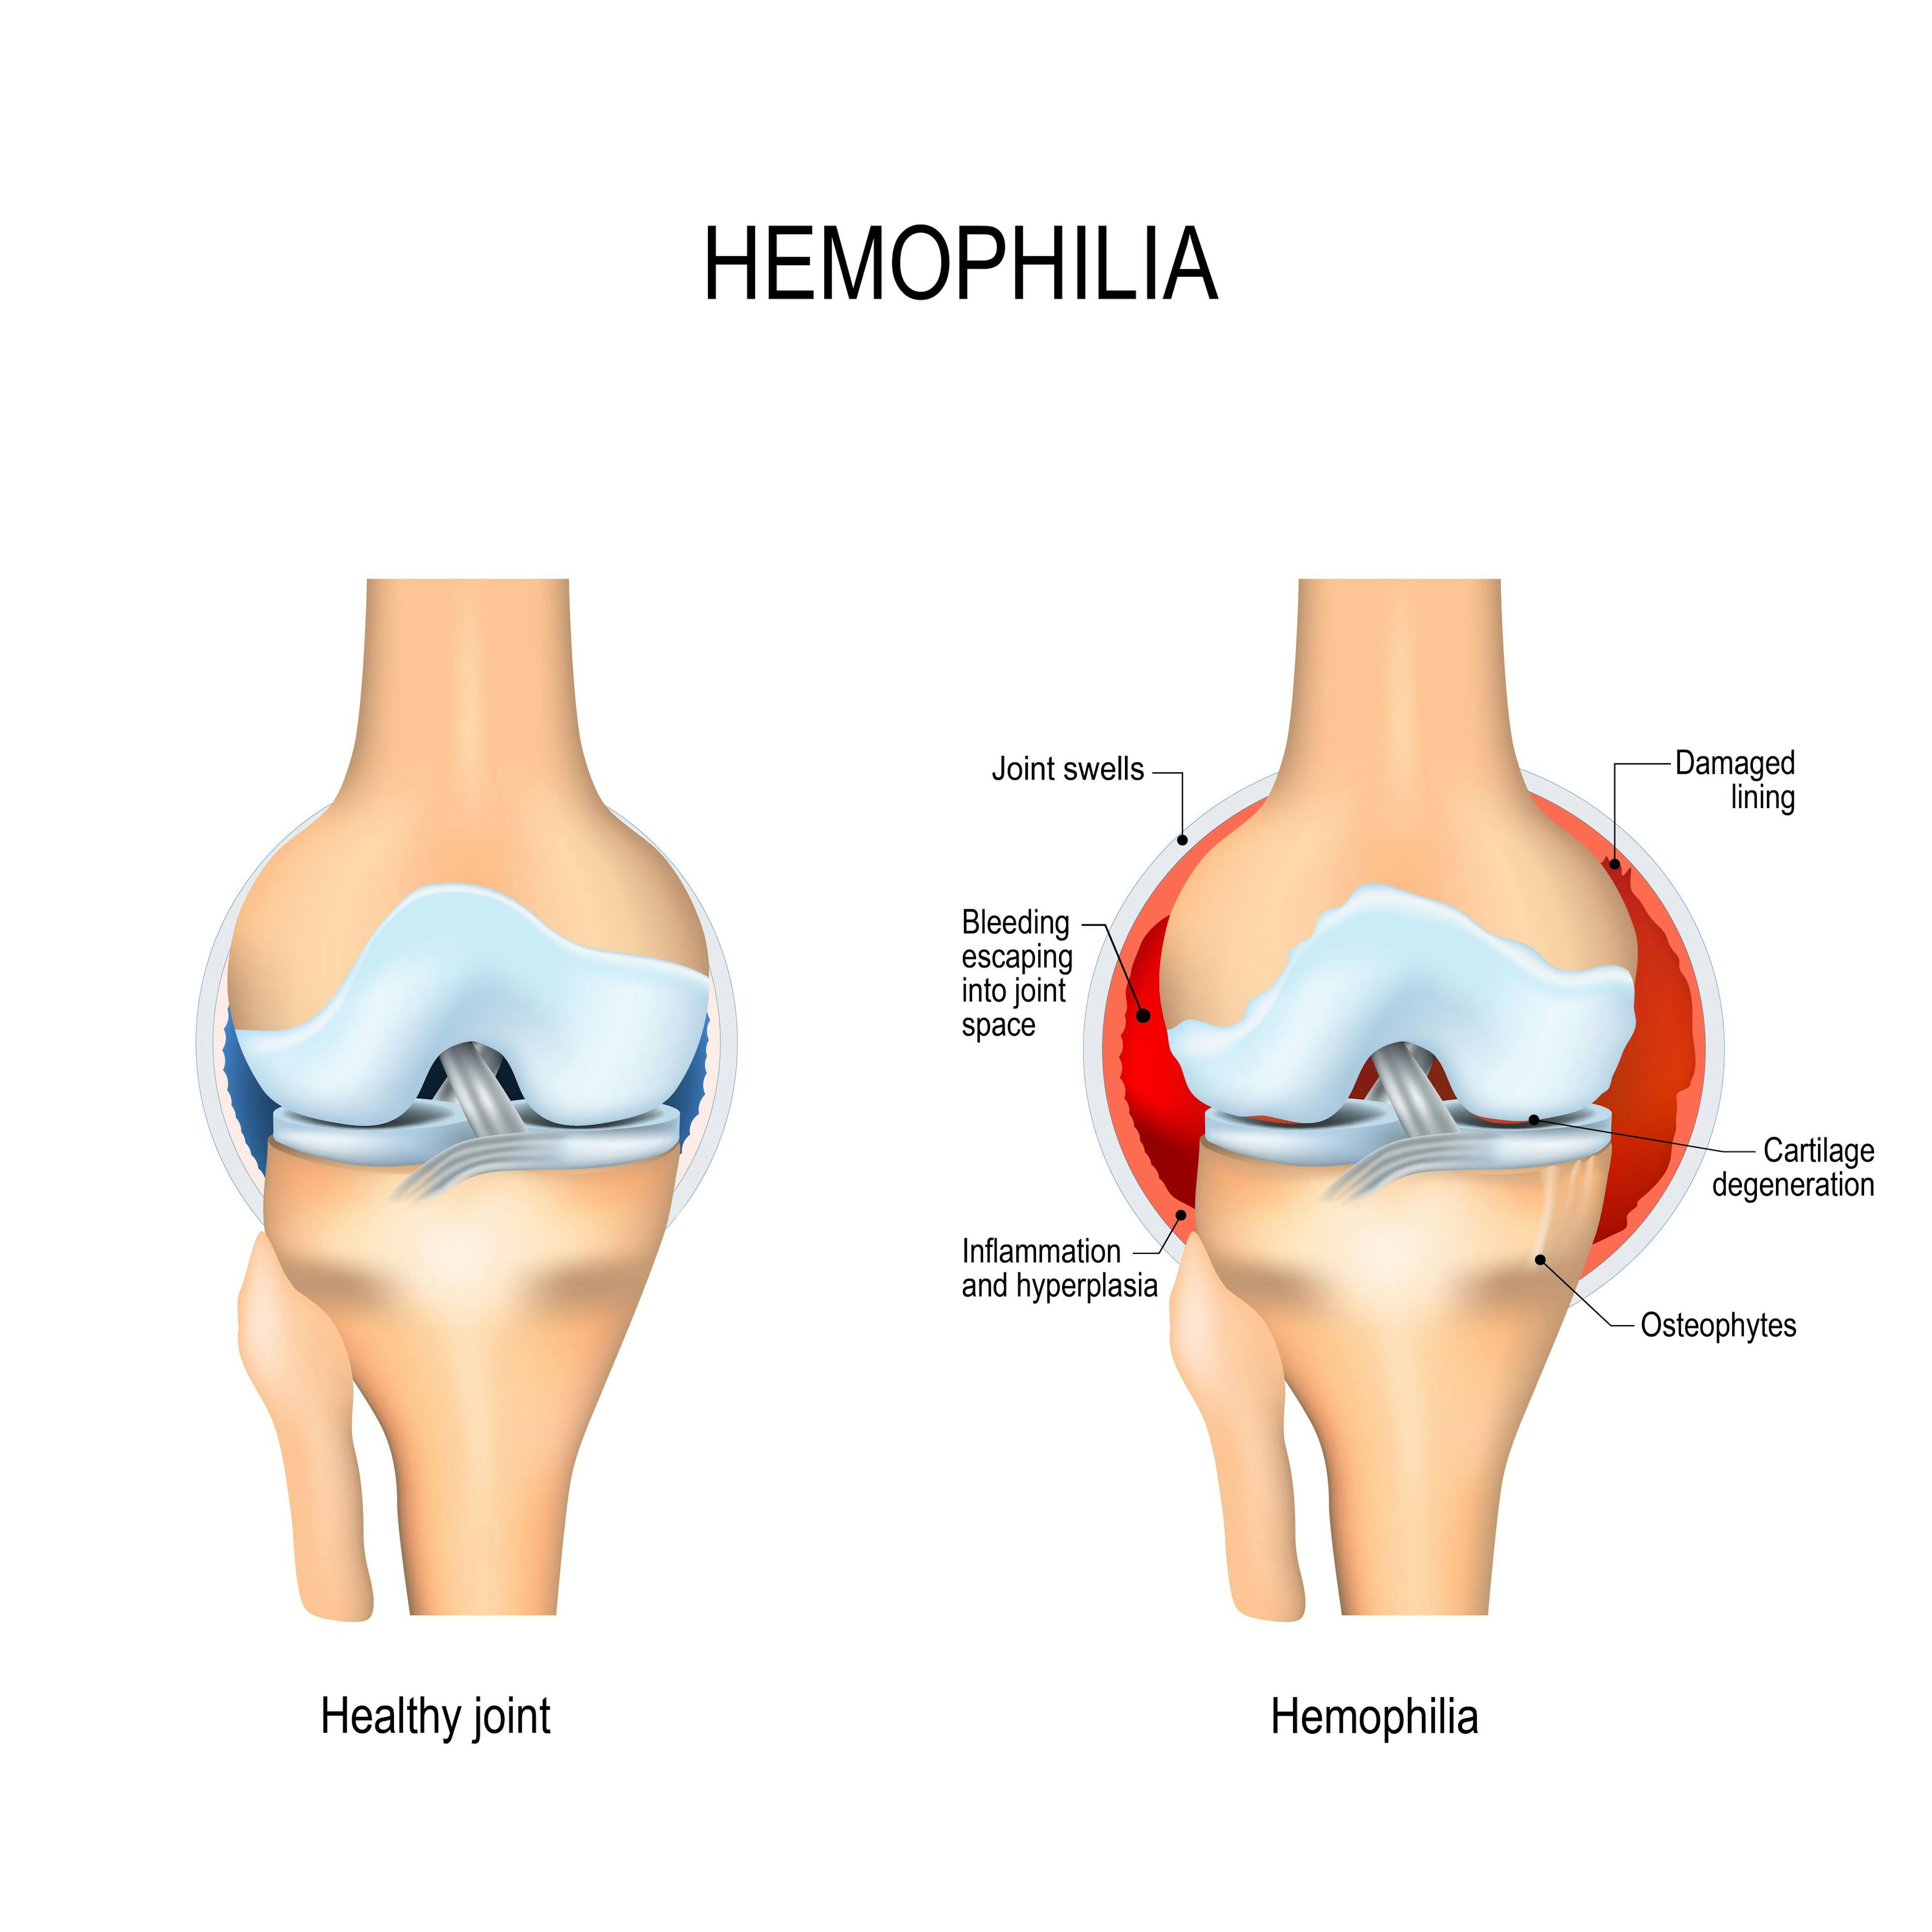 Study Highlights Poor Health Outcomes in Older Adults with Hemophilia